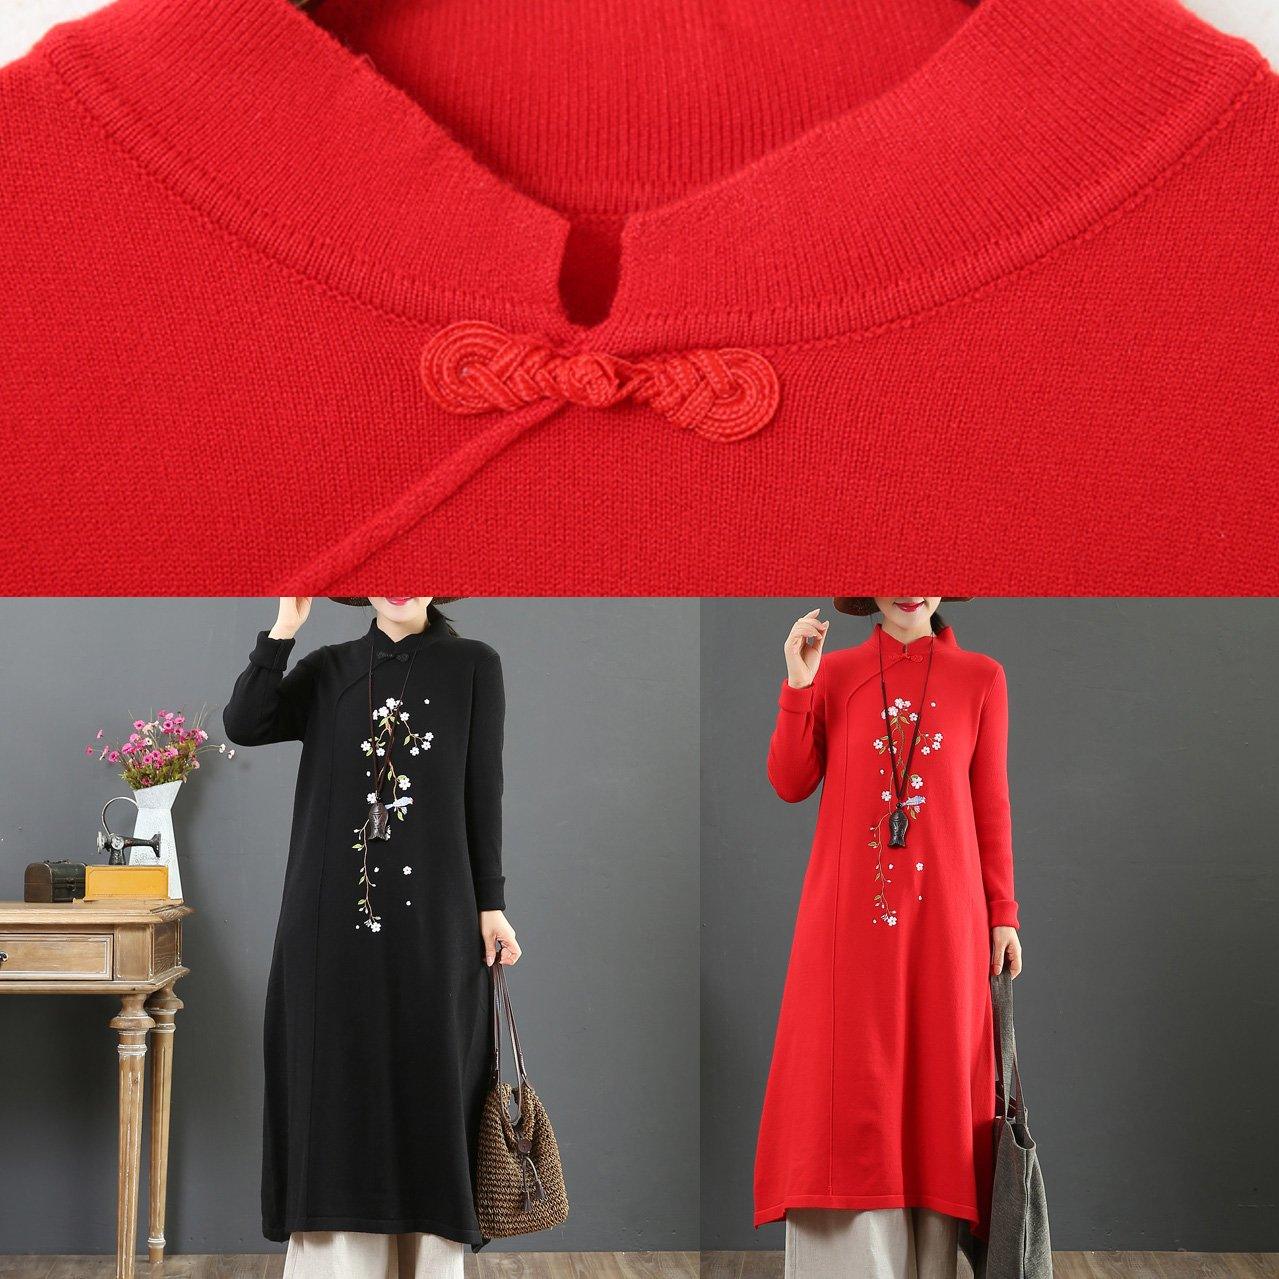 Cozy stand collar Sweater embroidery knit top pattern DIY red oversized knitted tops - Omychic